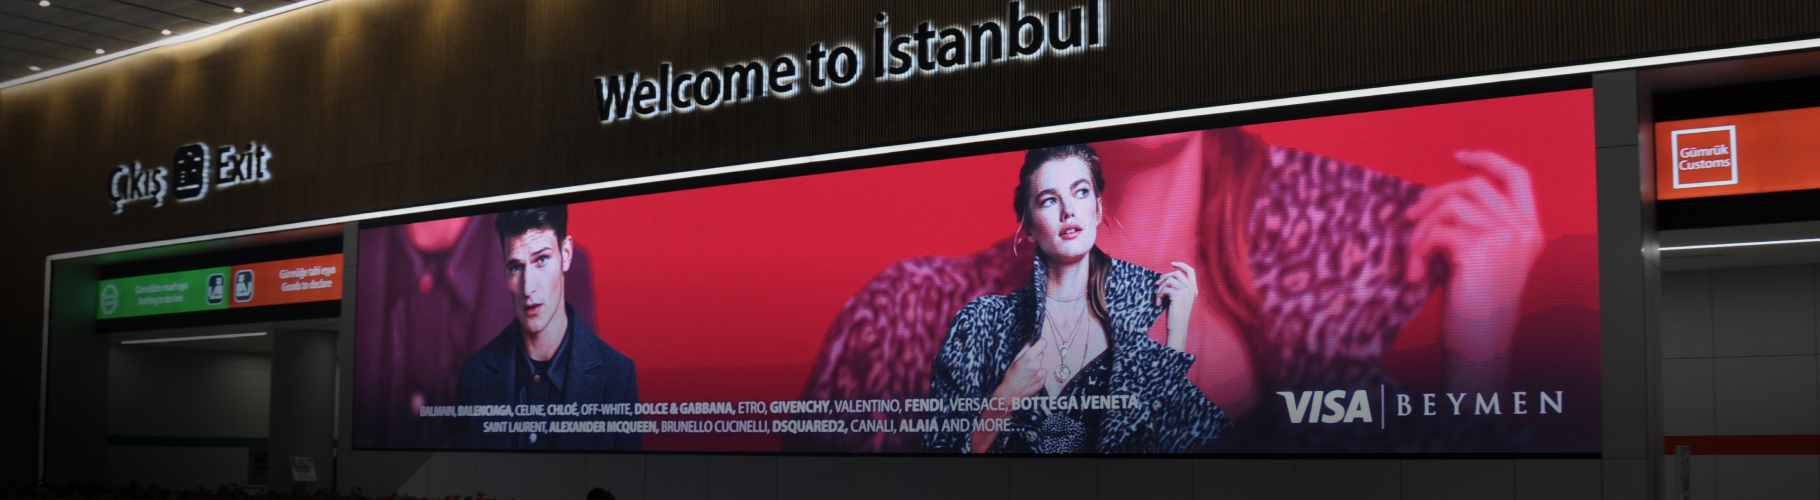 About iGA - Istanbul Airport (IST)